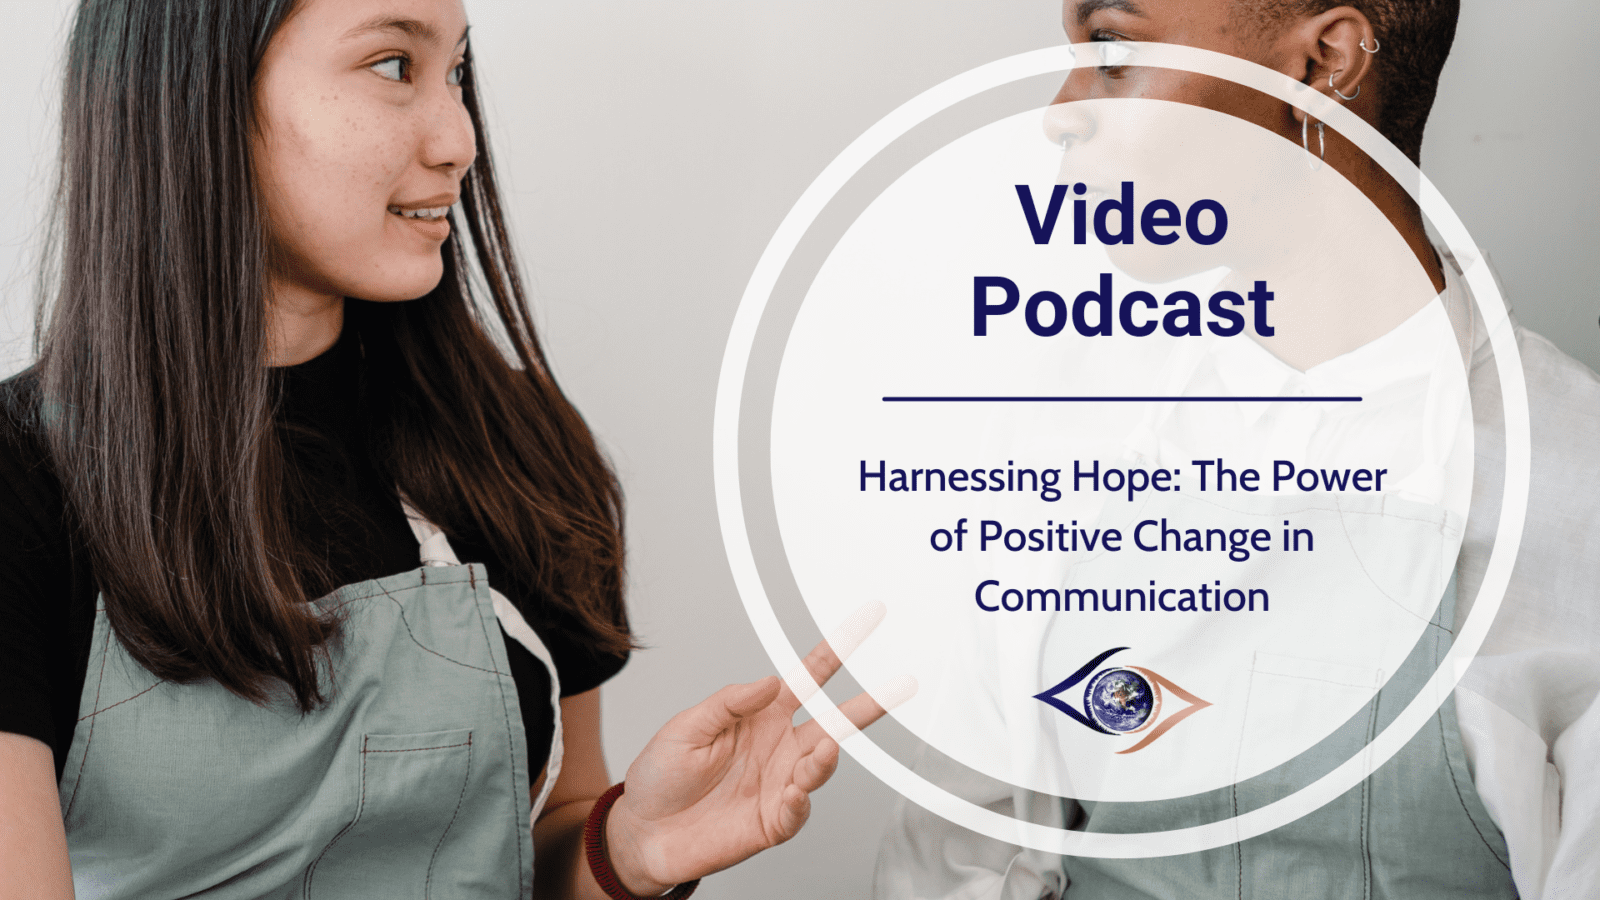 Harnessing Hope: The Power of Positive Change in Communication